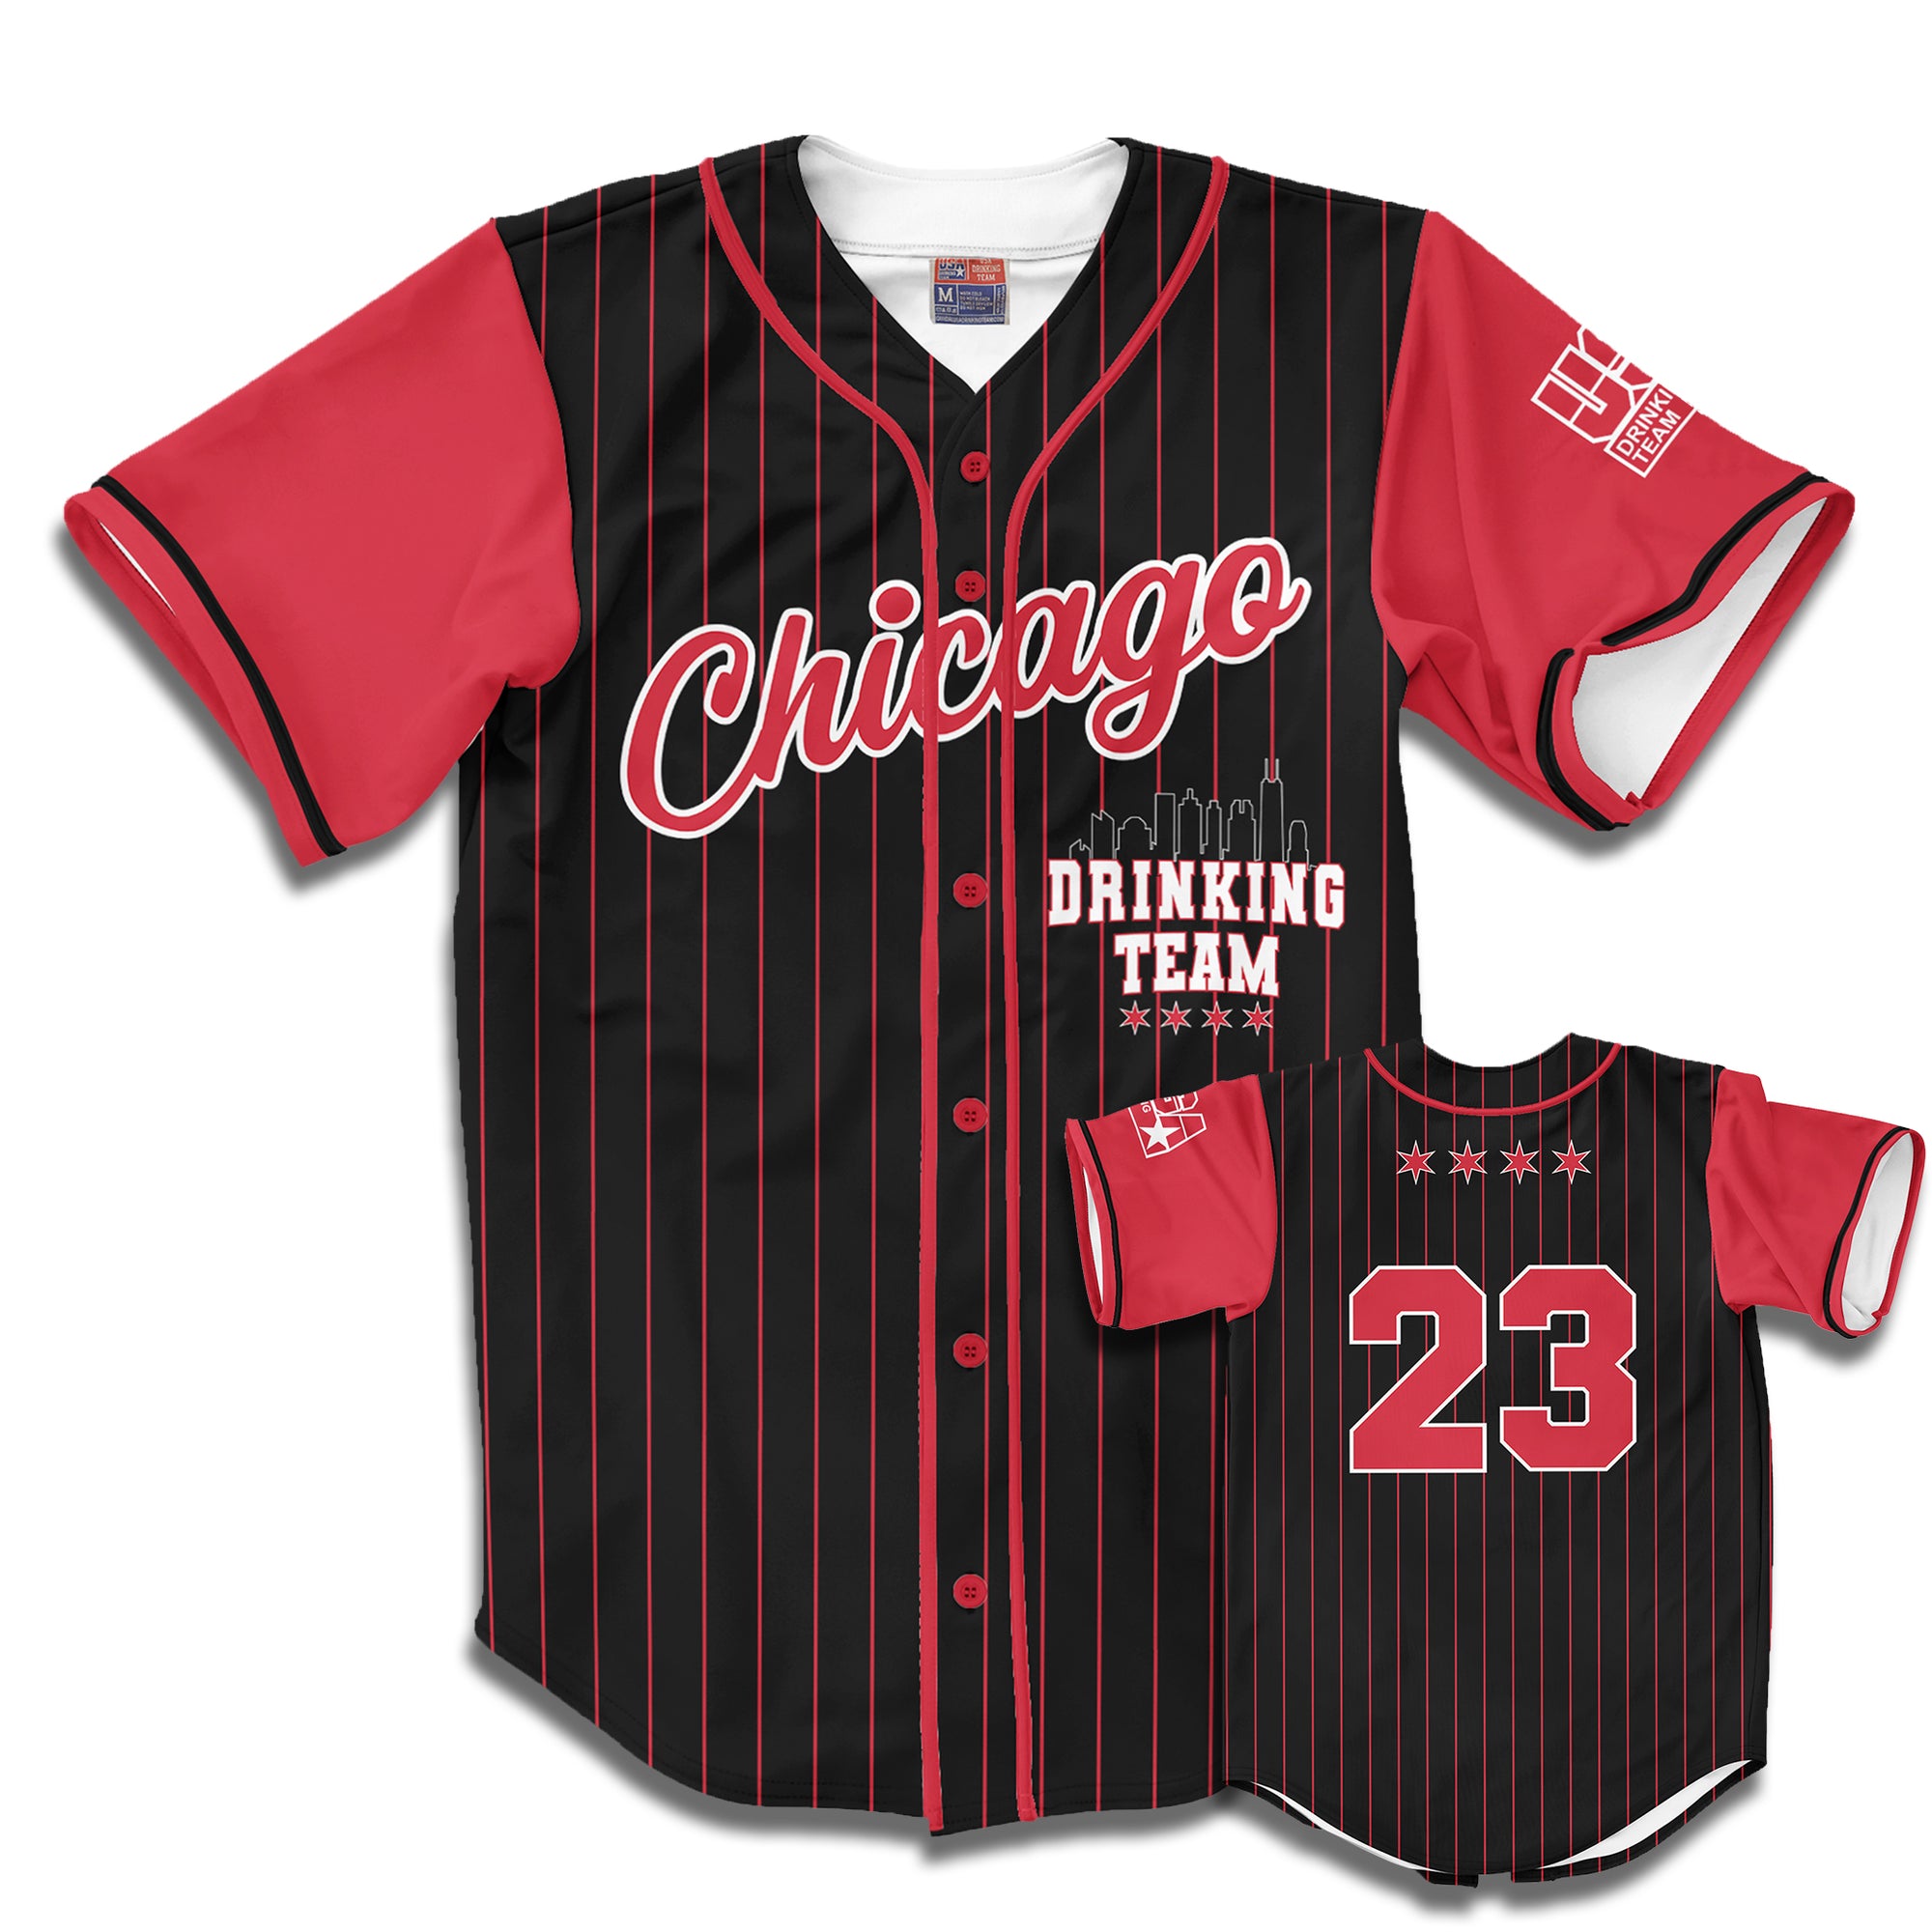 Chicago Pro Baseball Shirt | Buy Fan Gear for Chicago Baseball | Chicago a  Drinking Town with a Baseball Problem